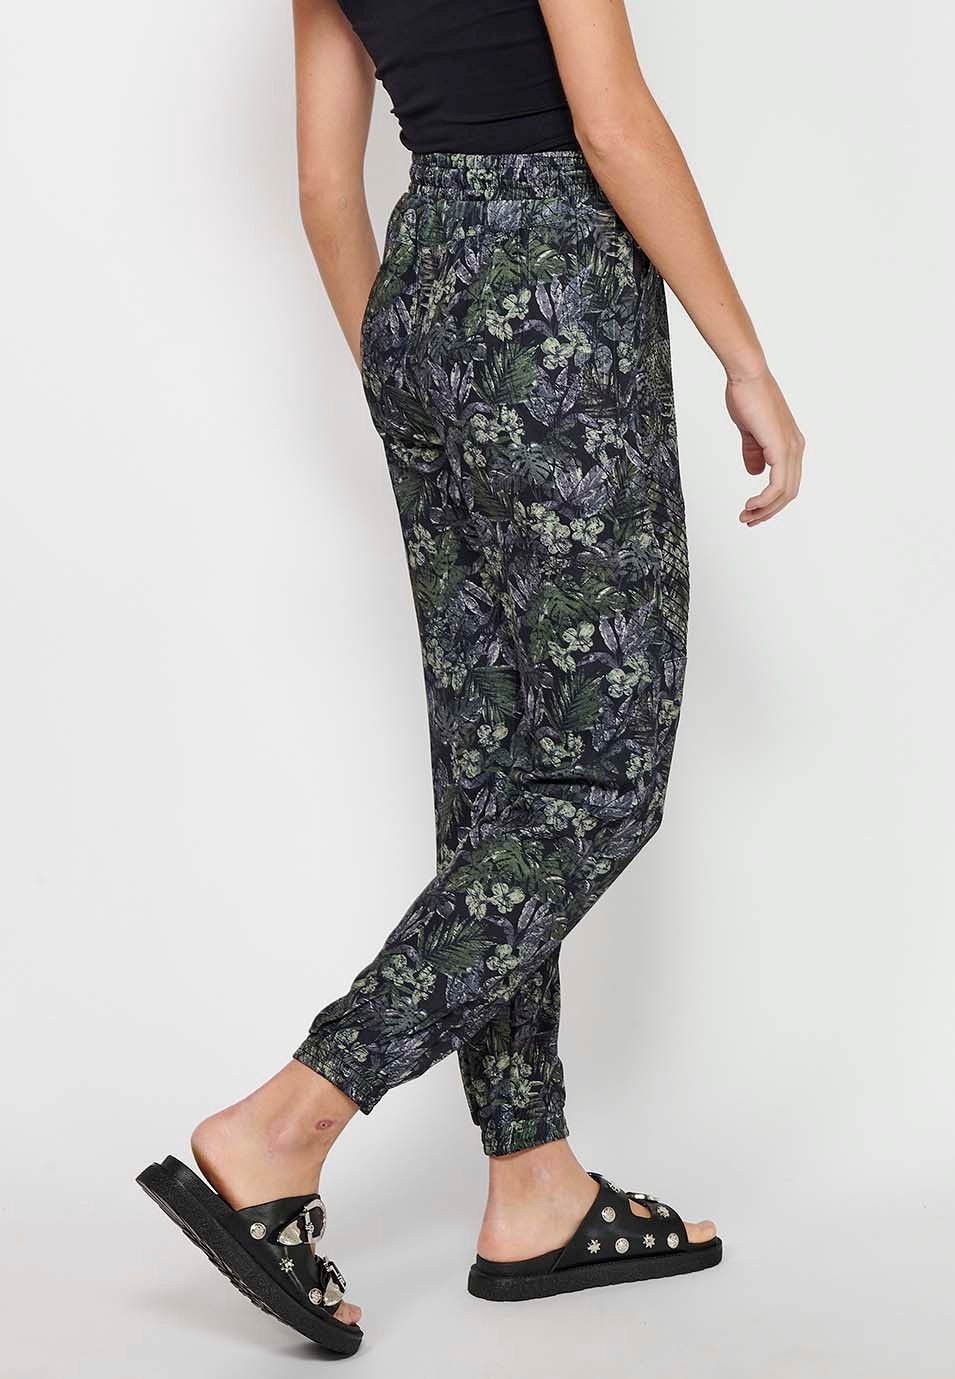 Long jogging pants fitted at the ankles with elasticated waistband with drawstring and Khaki floral print for Women 5